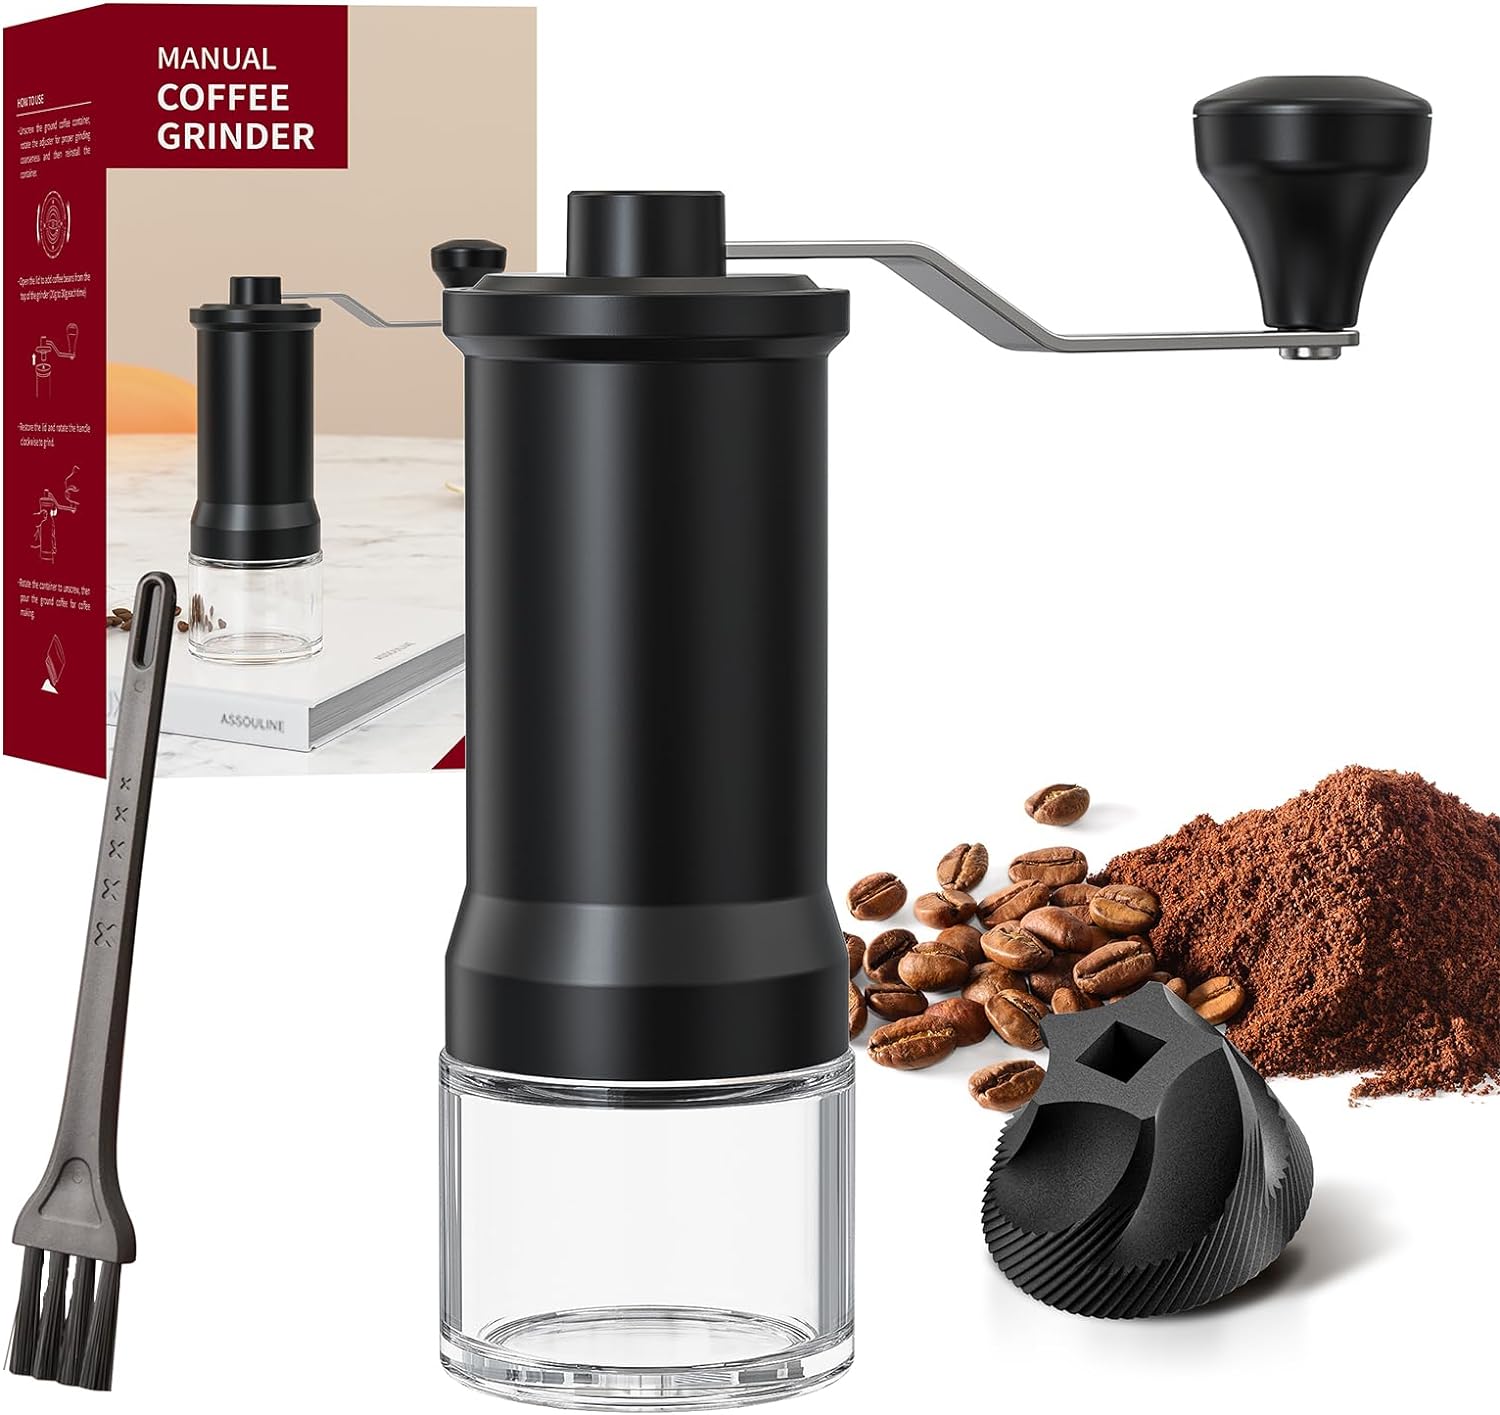 Richsum Manual Coffee Grinder with Adjustable Coarsenseness - Extended Stainless Steel Handle - Reinforced Glass Base Ideal for espresso broth and hand drops